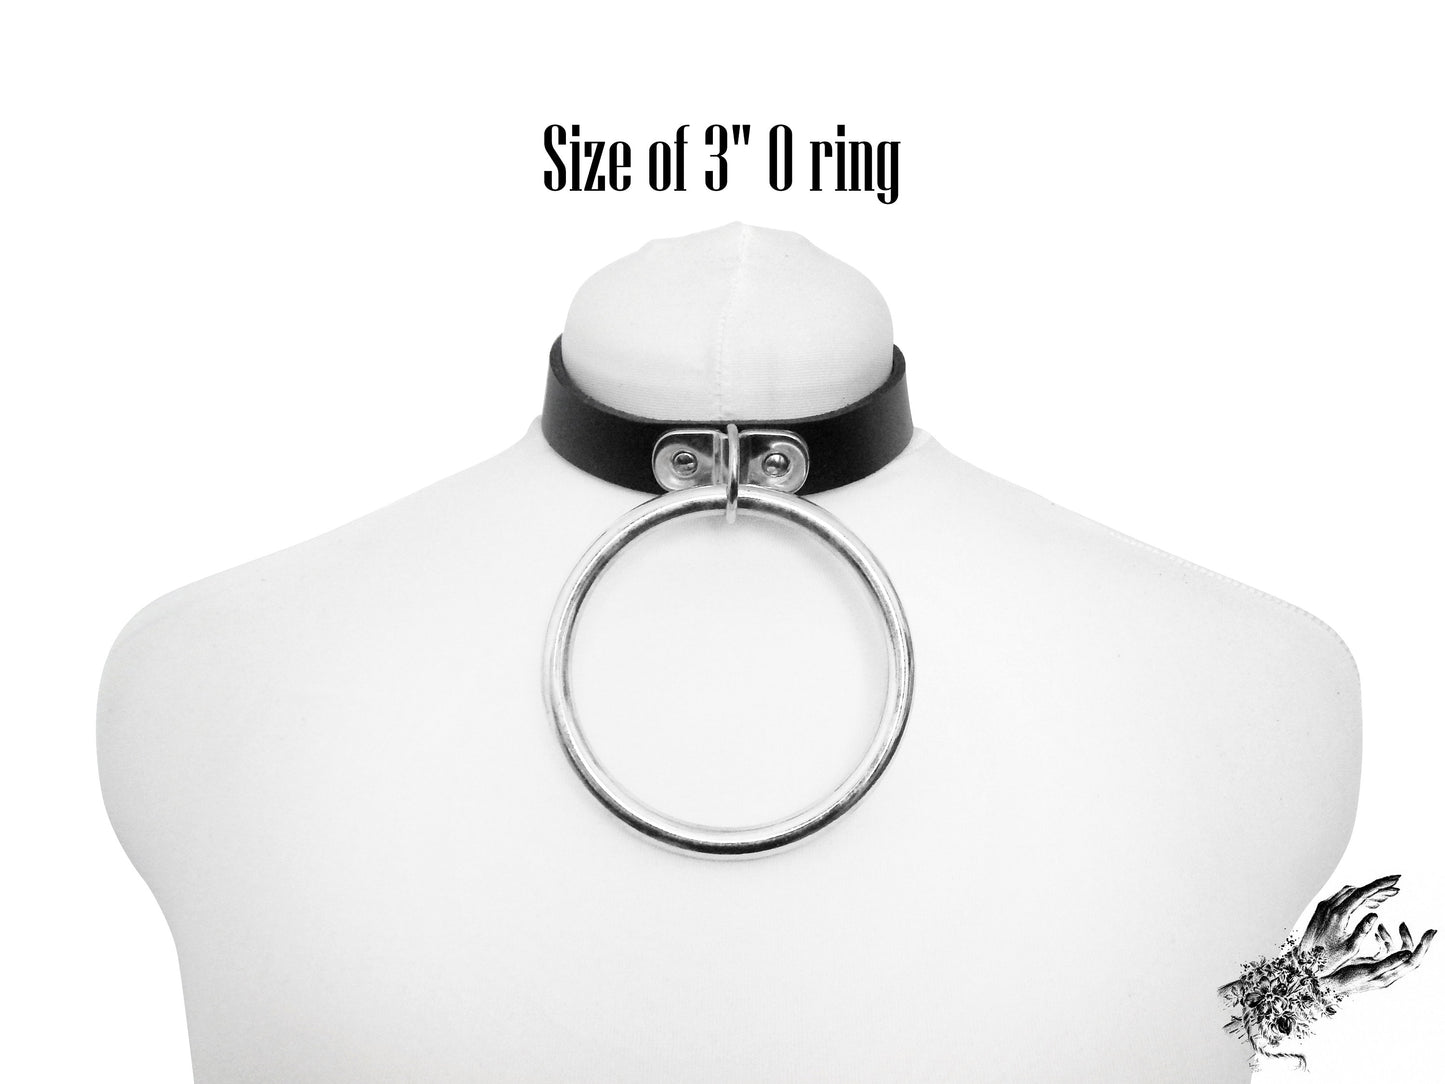 Pink Studded D and O Ring Choker